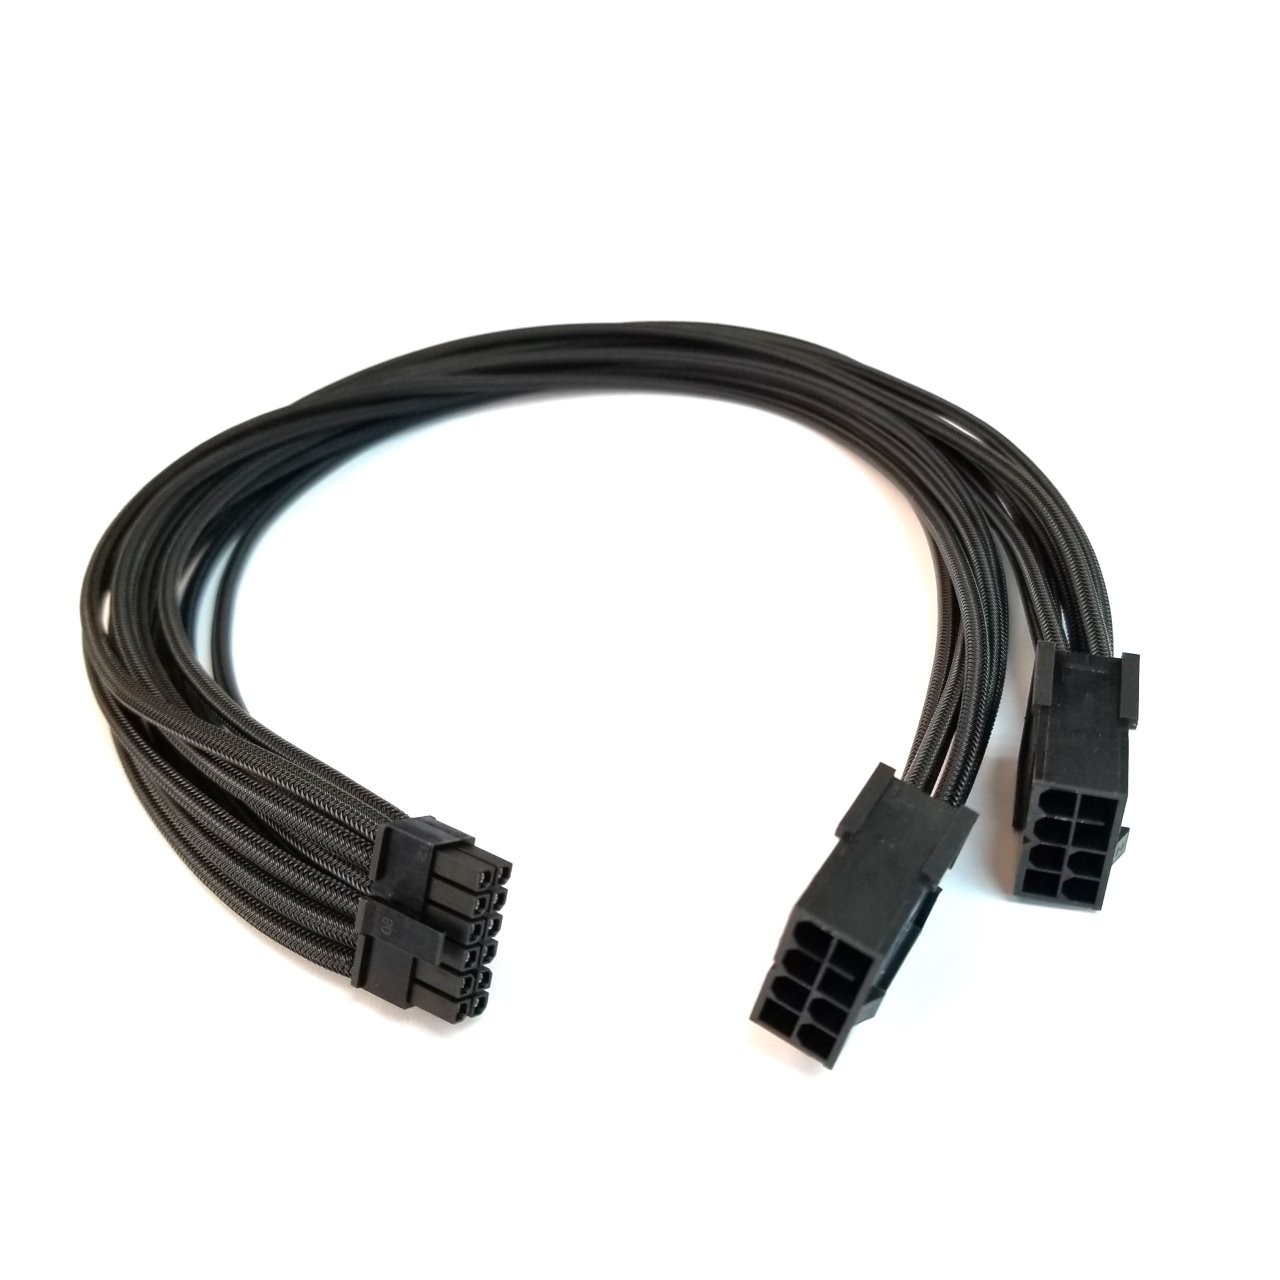 Black - 300MM ASIAHORSE 16AWG RTX 12Pin to Dual 8P PCIe Sleeved Extension Cable Connector for NVIDIA Ampere GEFORCE RTX 3060ti 3070 3080 3090 